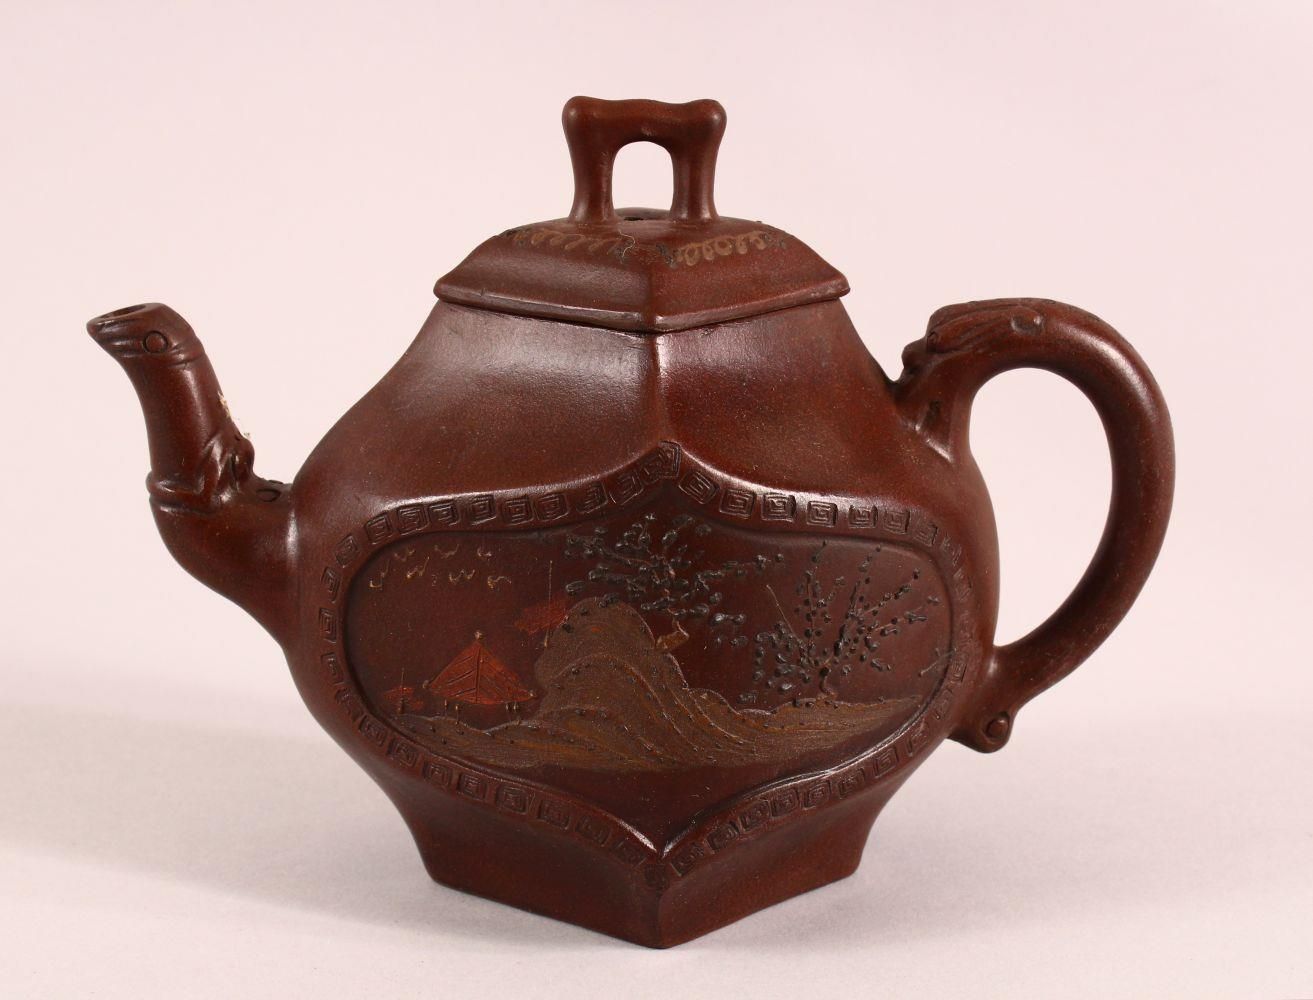 A CHINESE YIXING DIAMOND SHAPE TEAPOT, with a panel depicting a stylised landscape and another panel